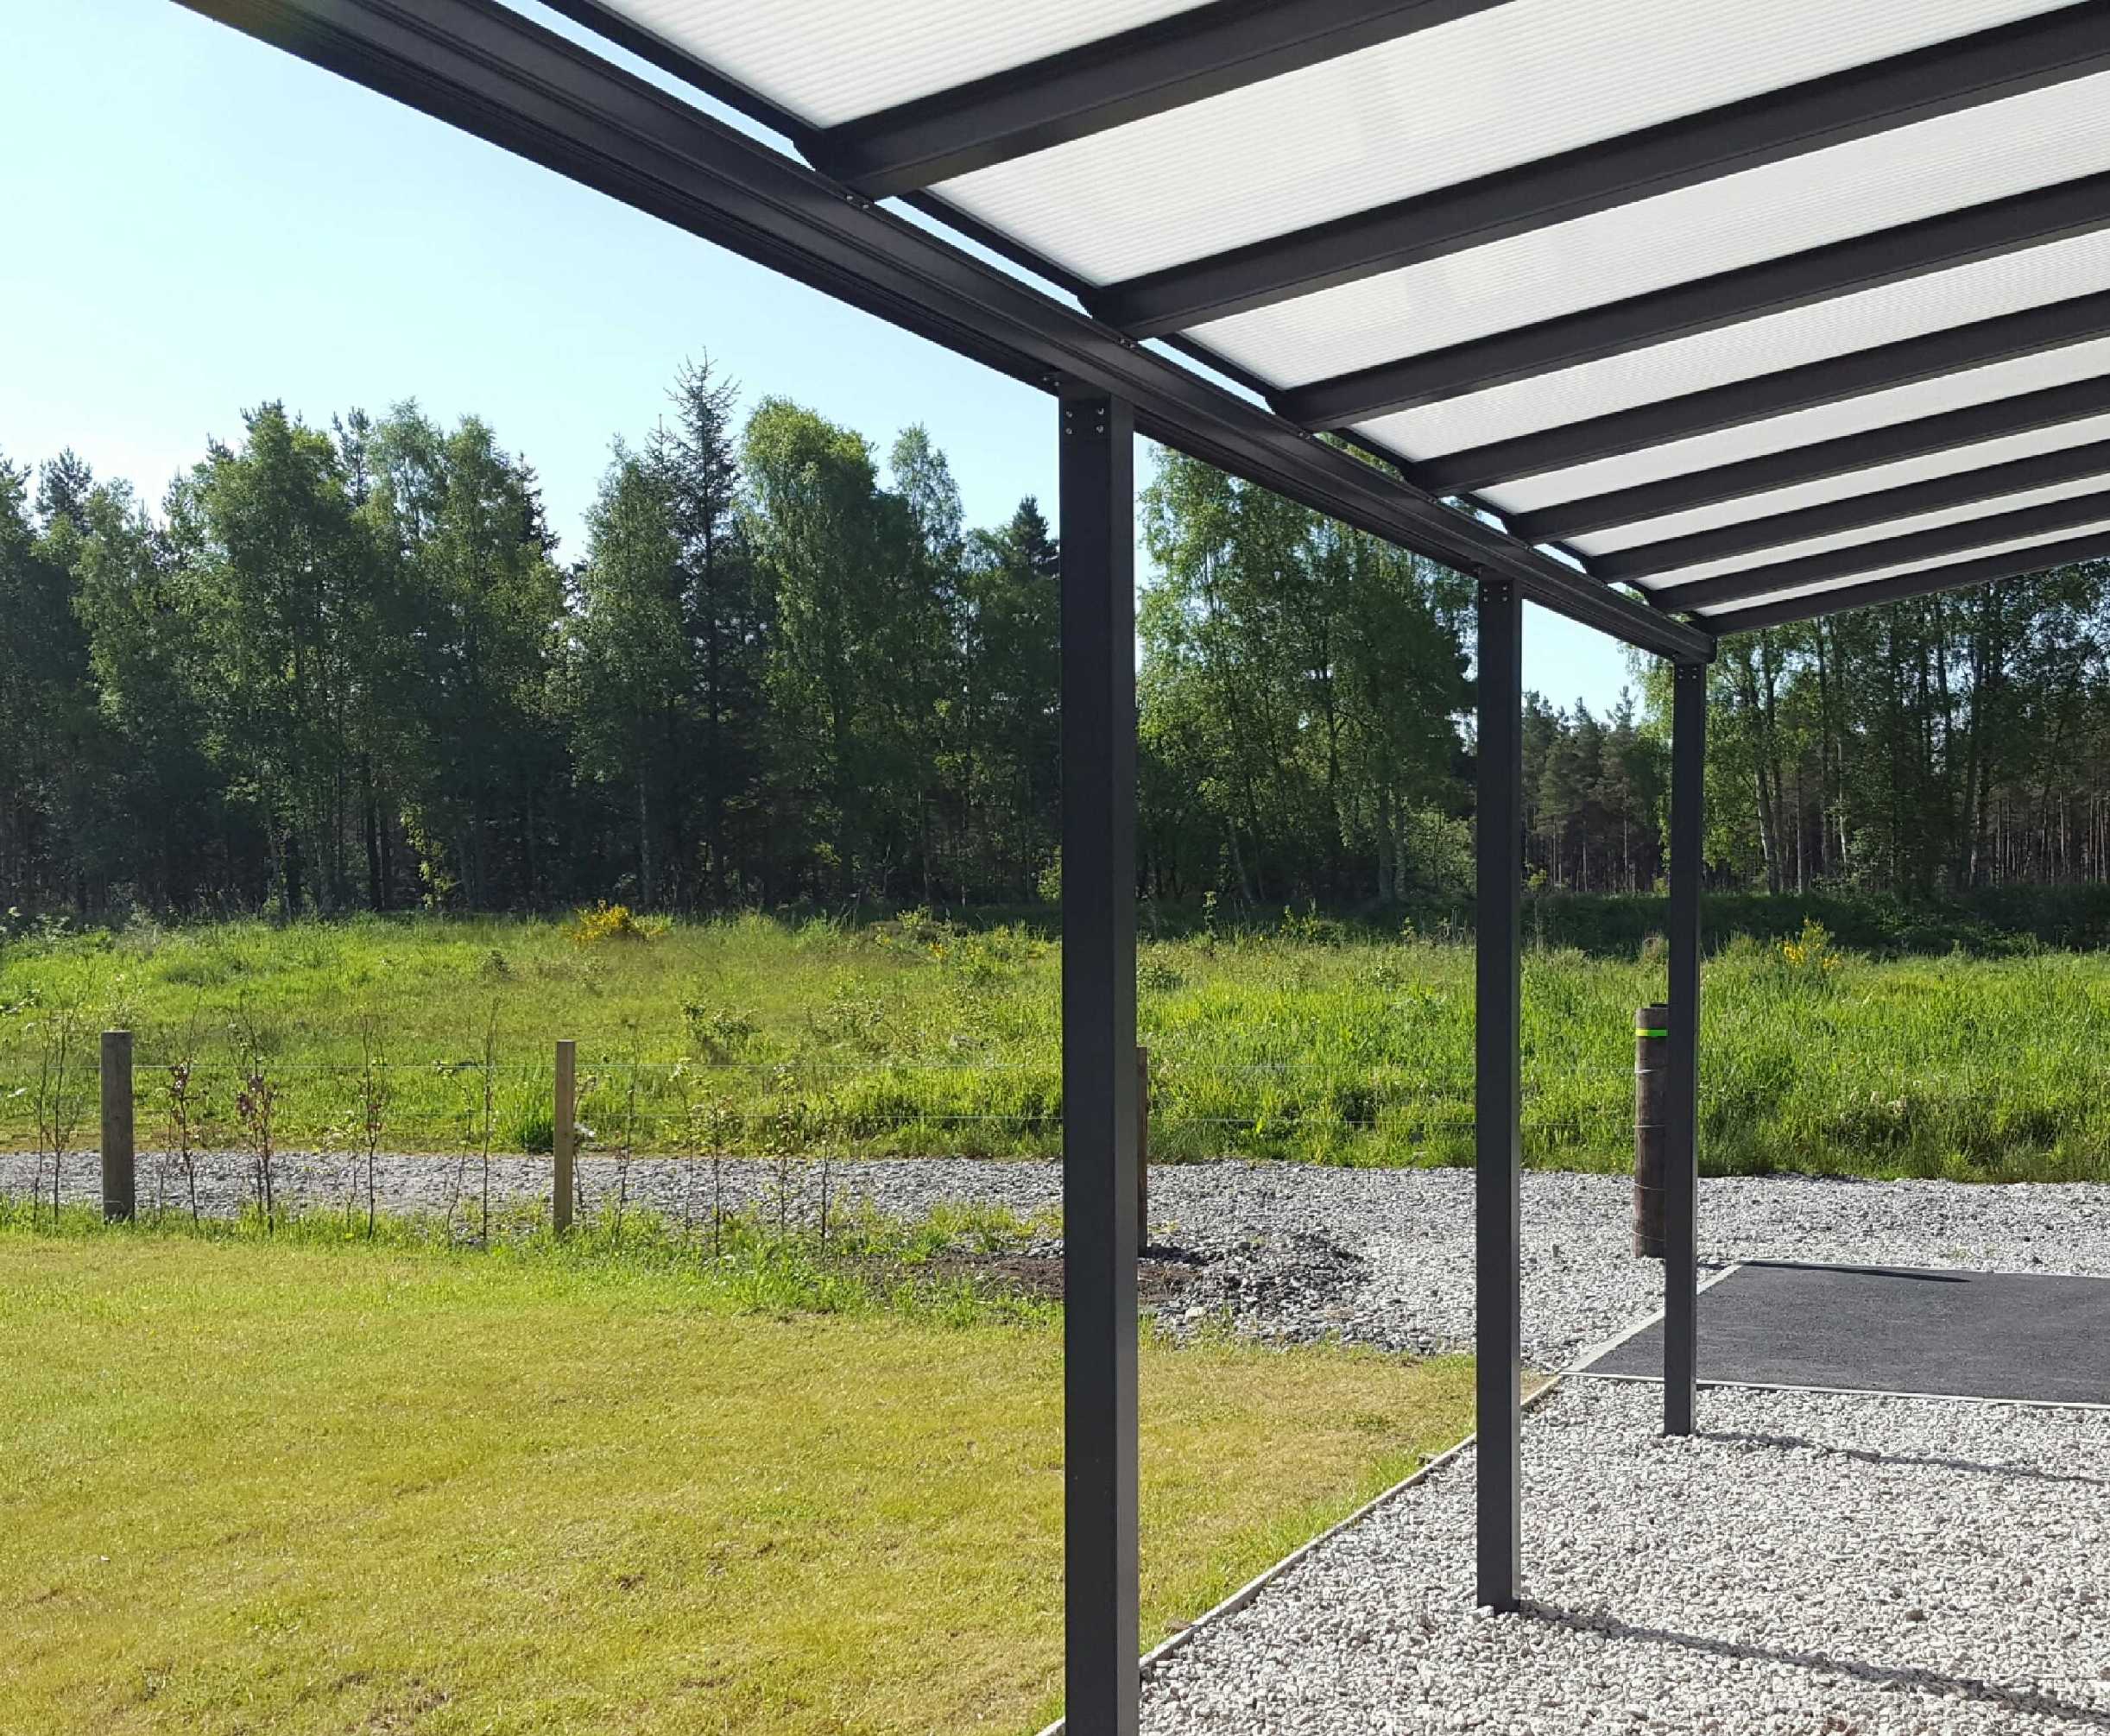 Omega Smart Lean-To Canopy, Anthracite Grey, UNGLAZED for 6mm Glazing - 4.9m (W) x 2.0m (P), (3) Supporting Posts